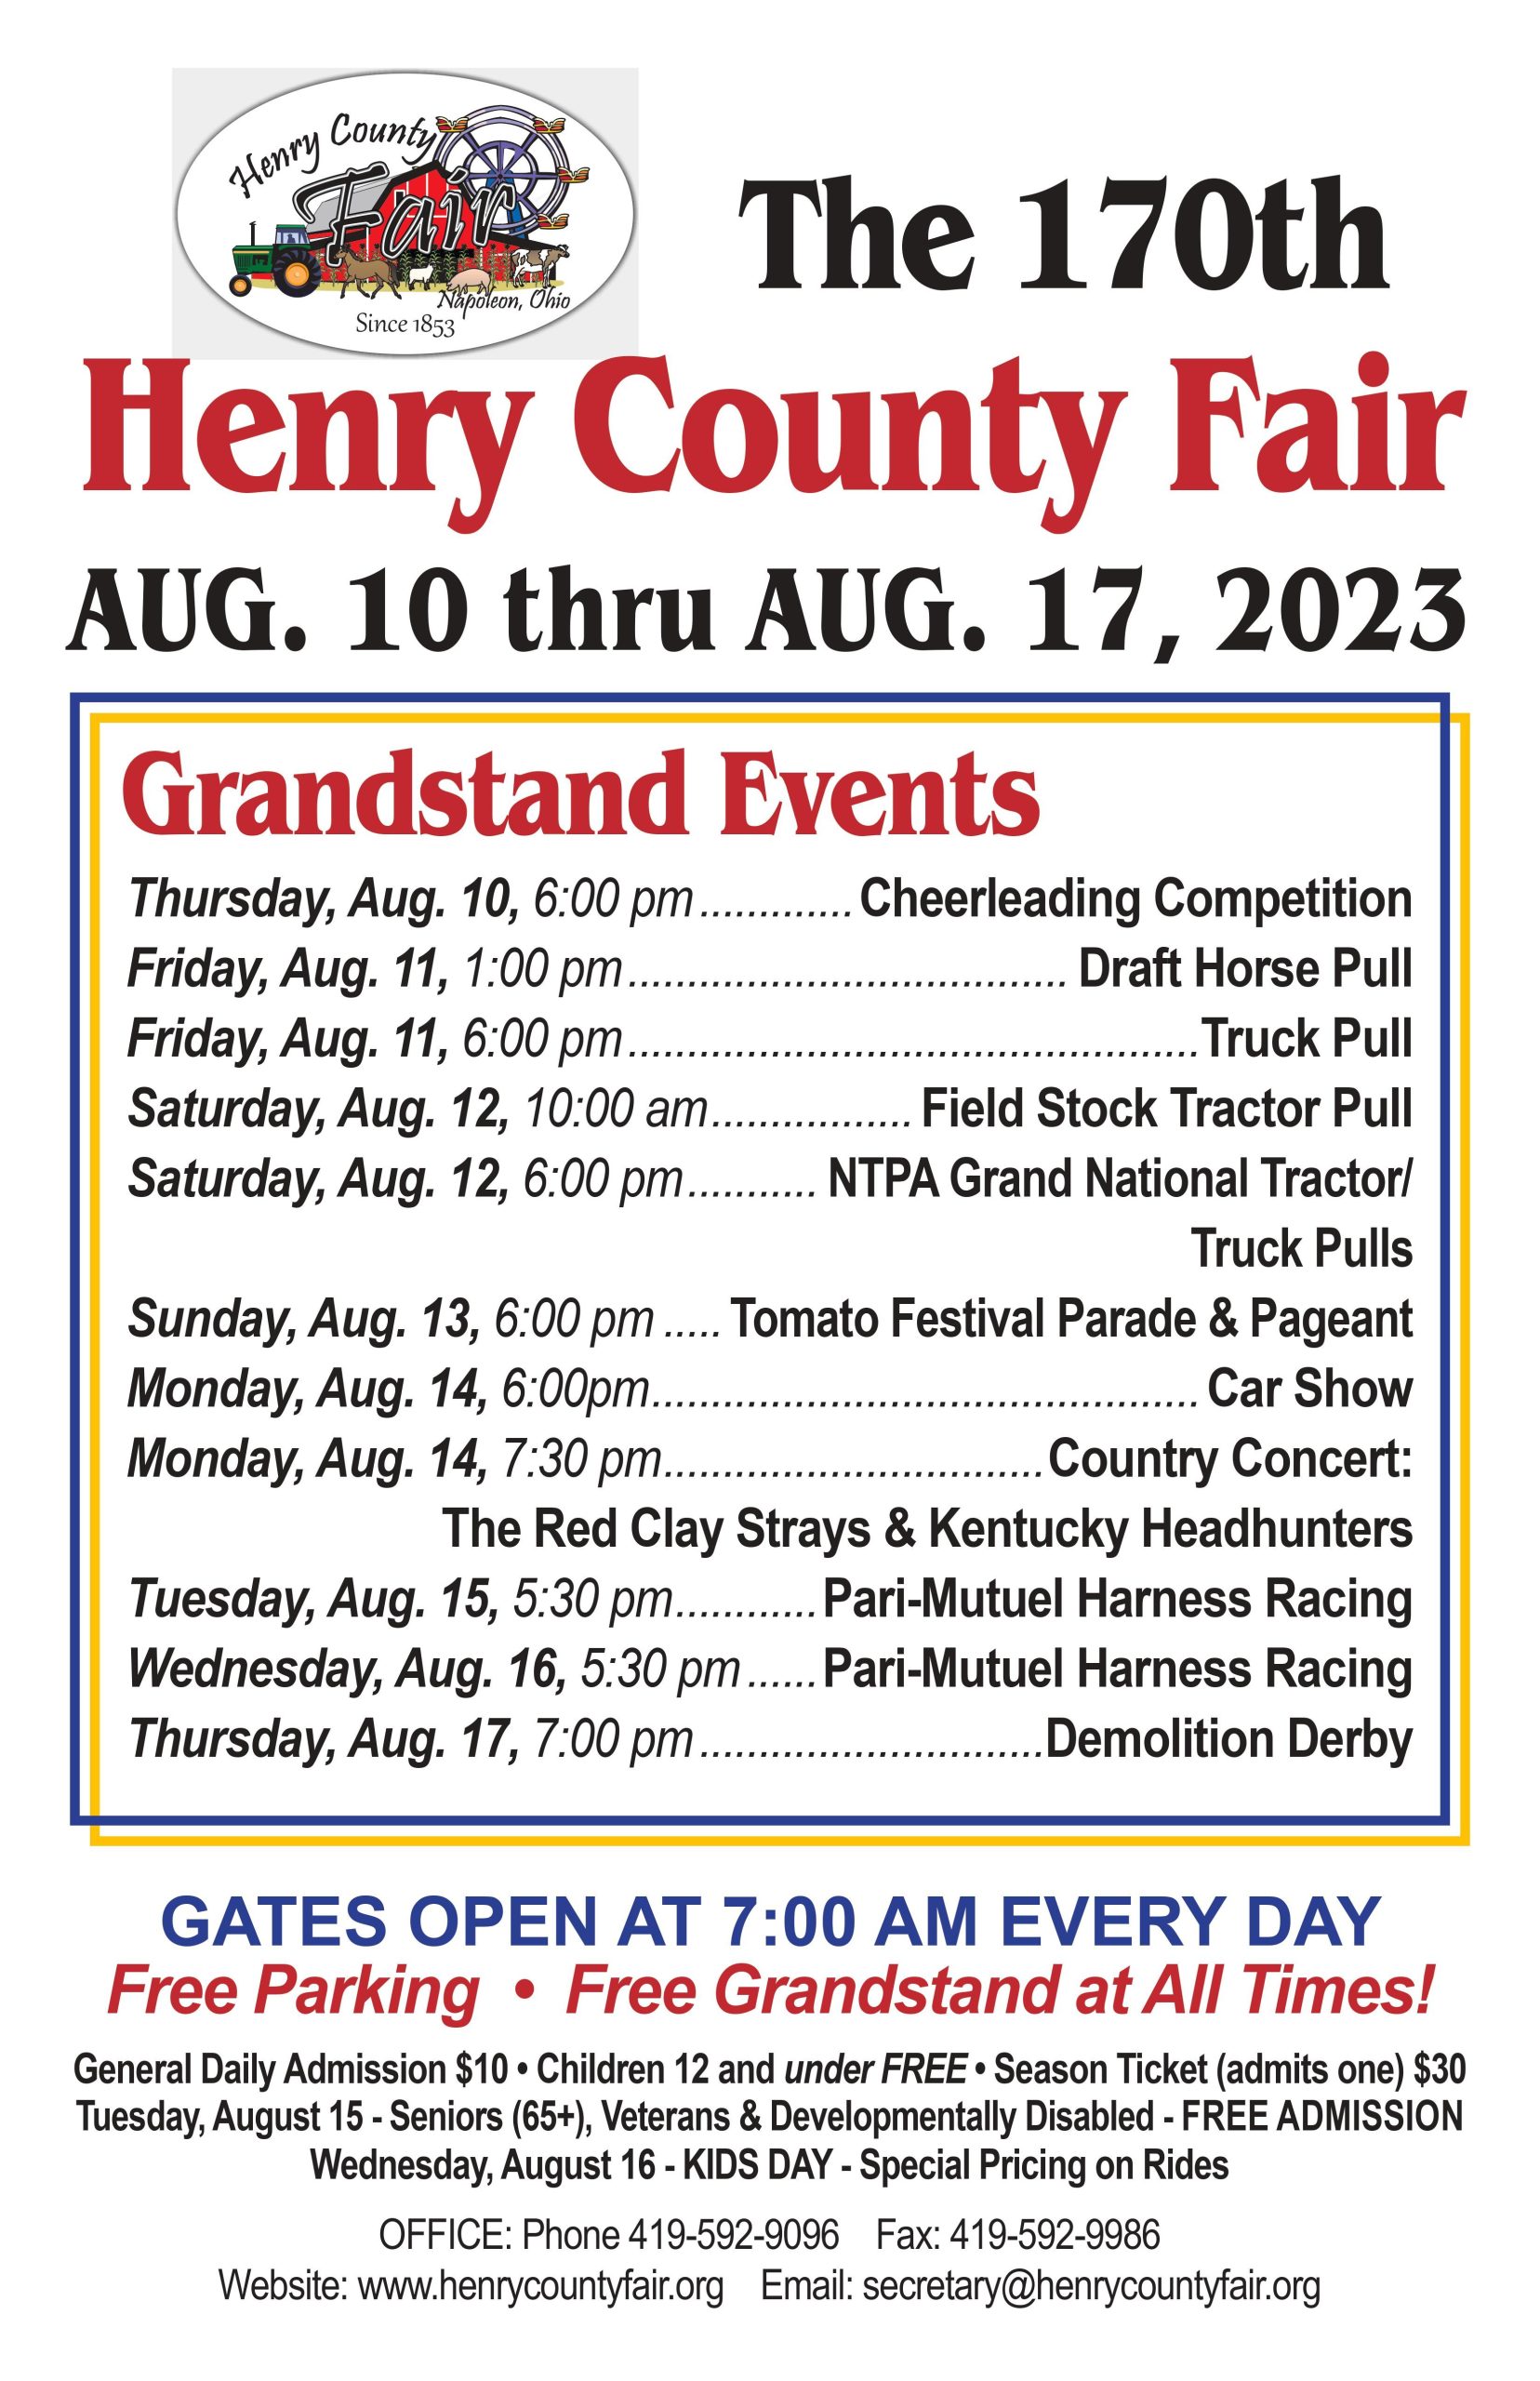 2023 Grandstand Events The Henry County Fair